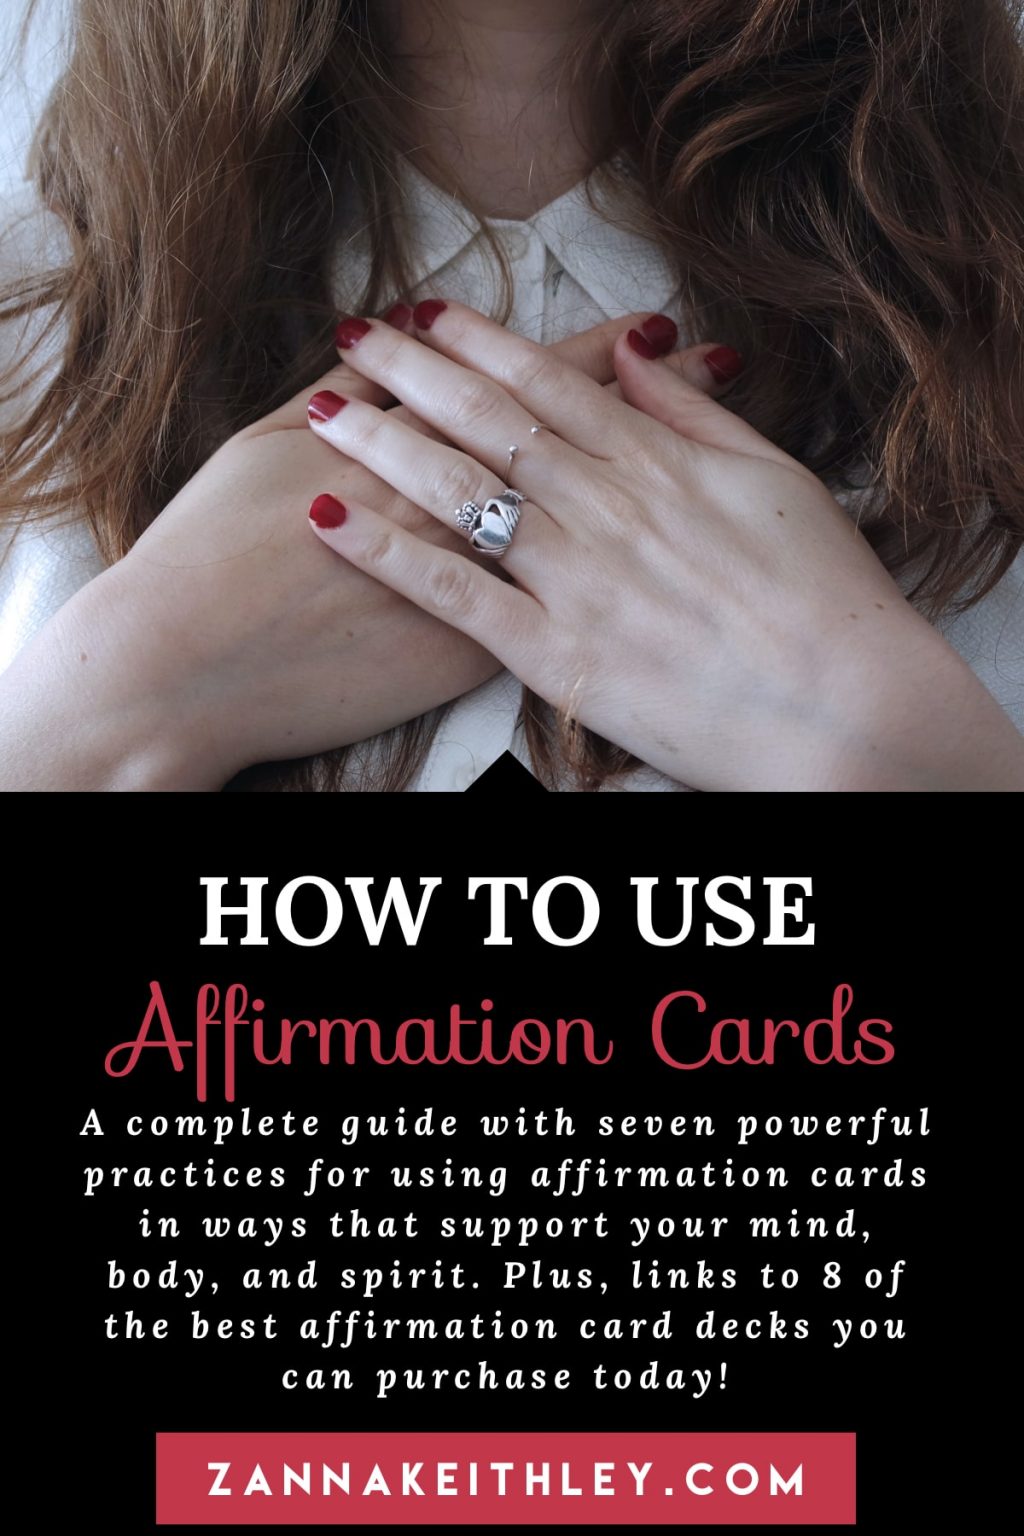 how-to-use-affirmation-cards-with-recommendations-zanna-keithley